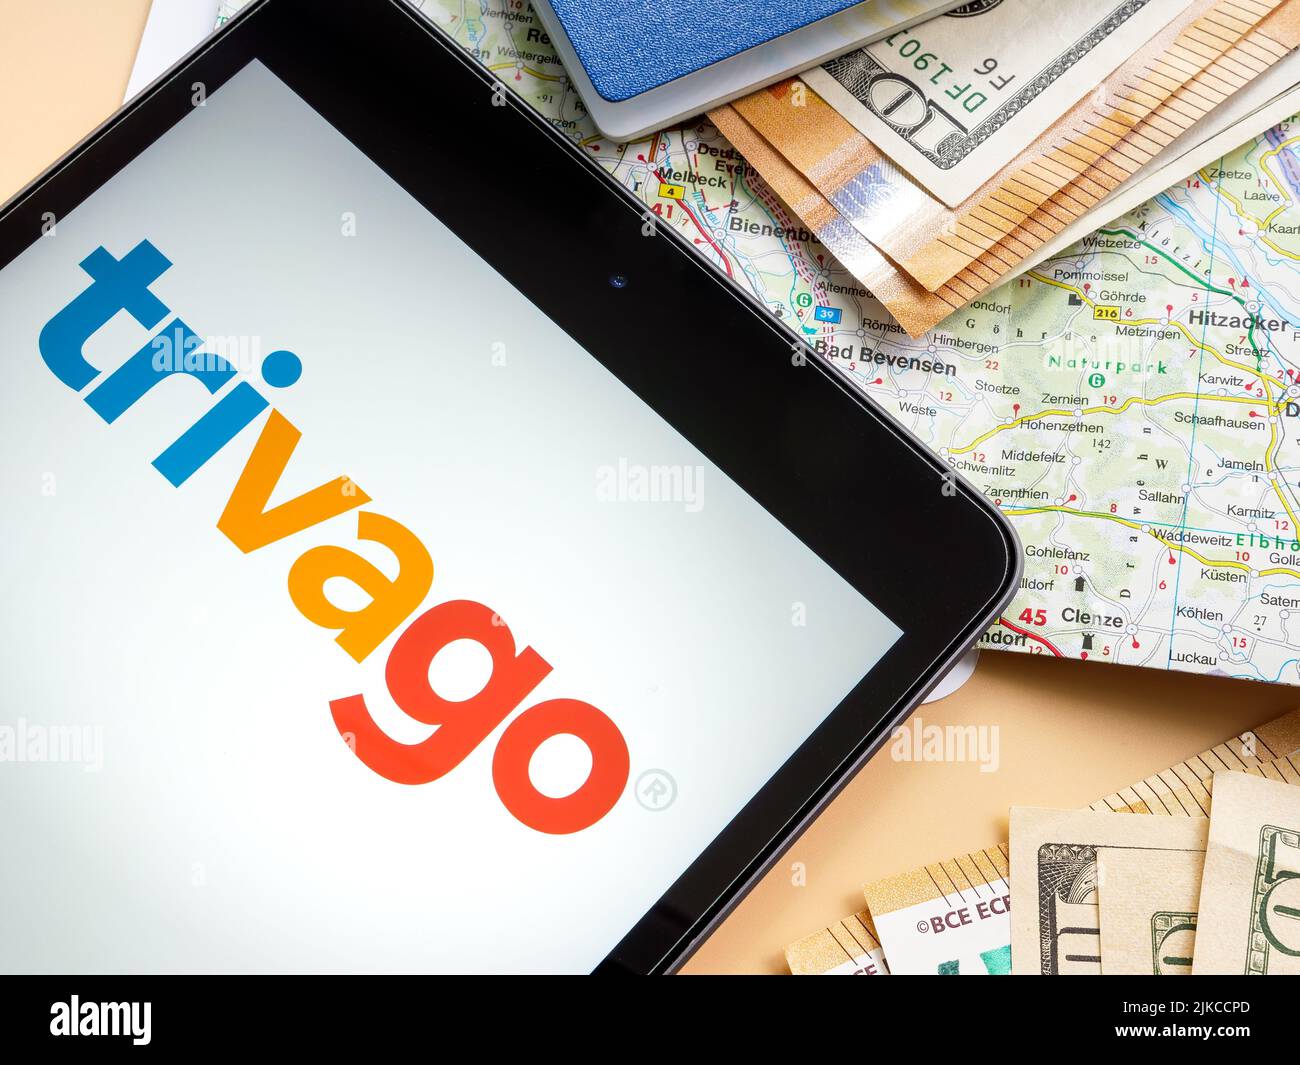 KYIV, UKRAINE - July 21, 2022.Tablet with trivago logo and map. Stock Photo